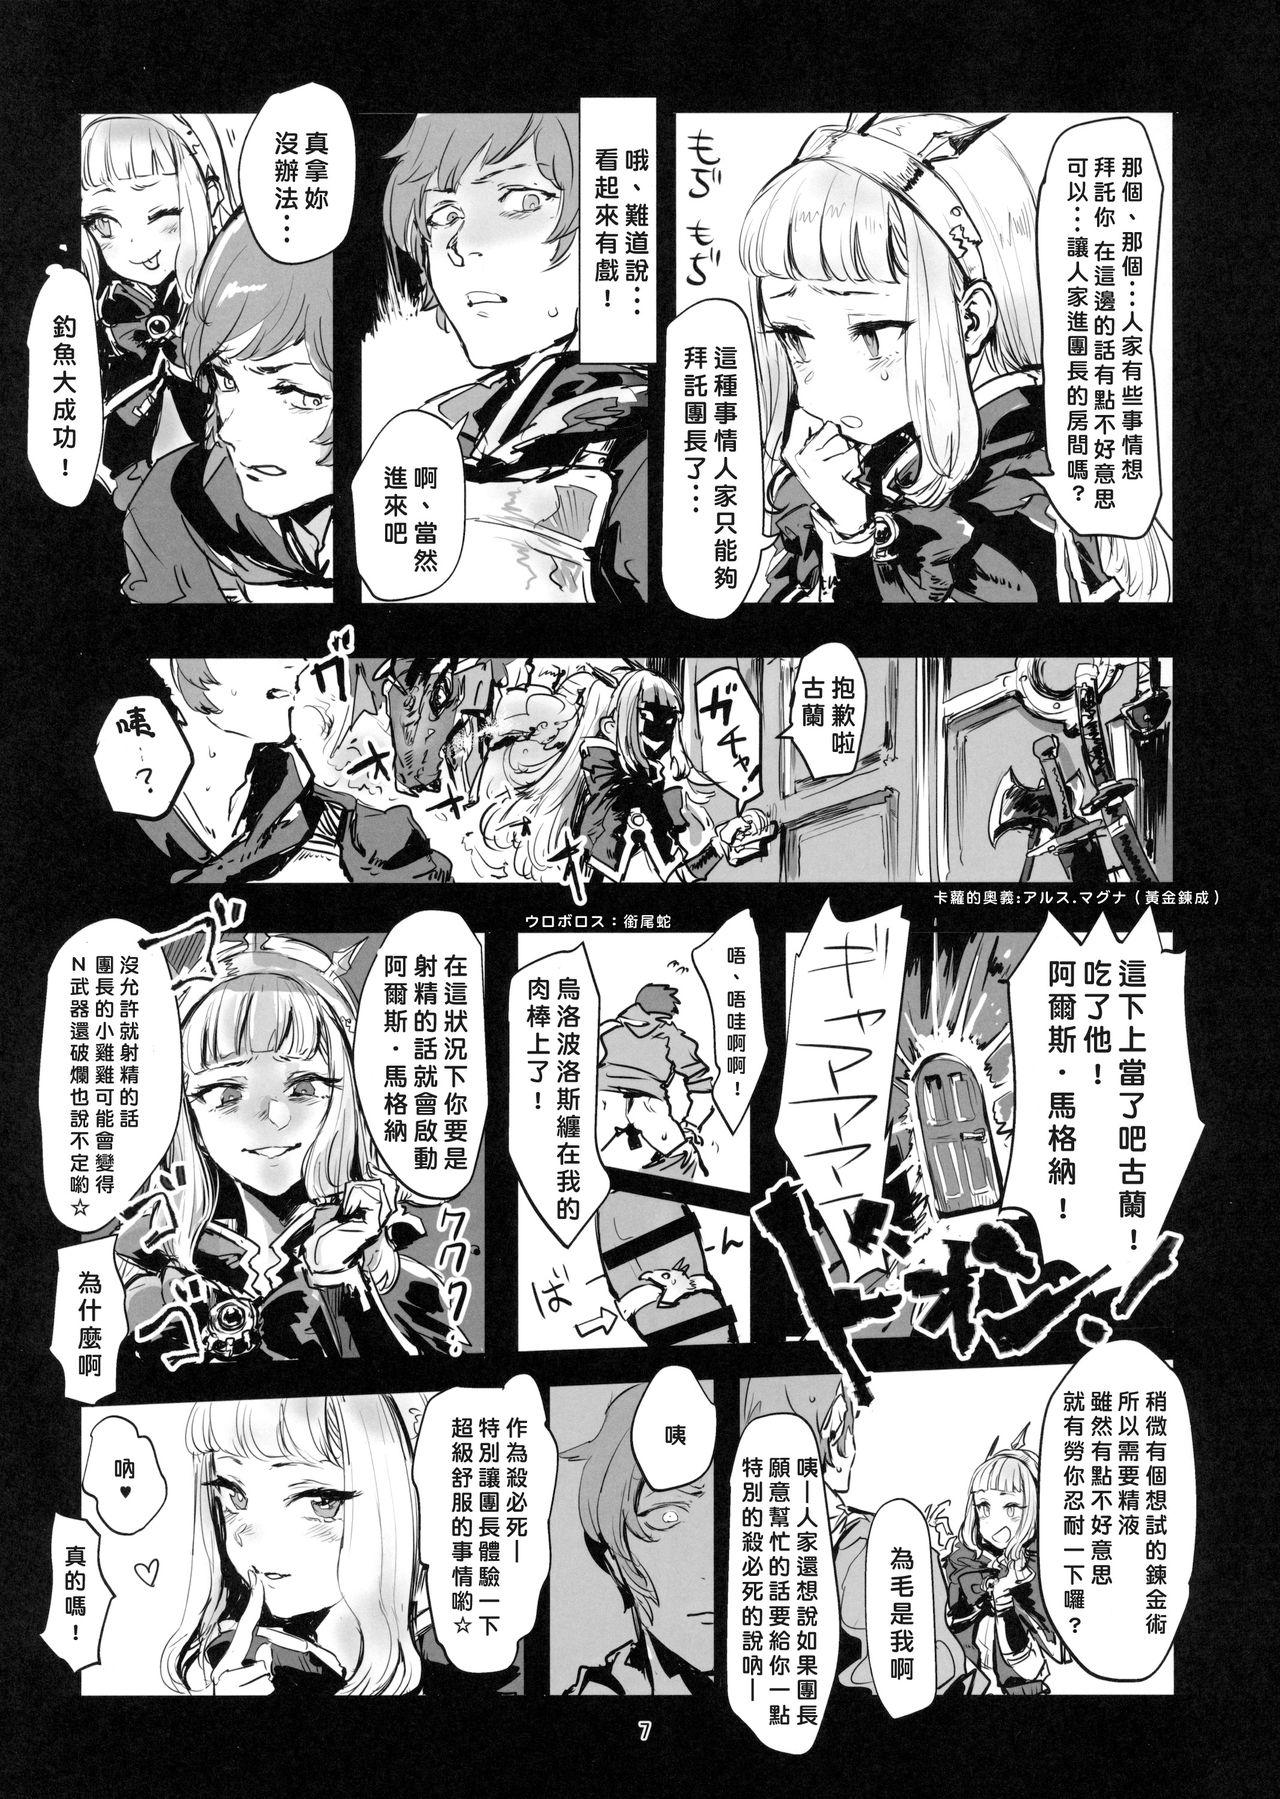 Jerking Off VOLPONE+ - Granblue fantasy Adorable - Page 6